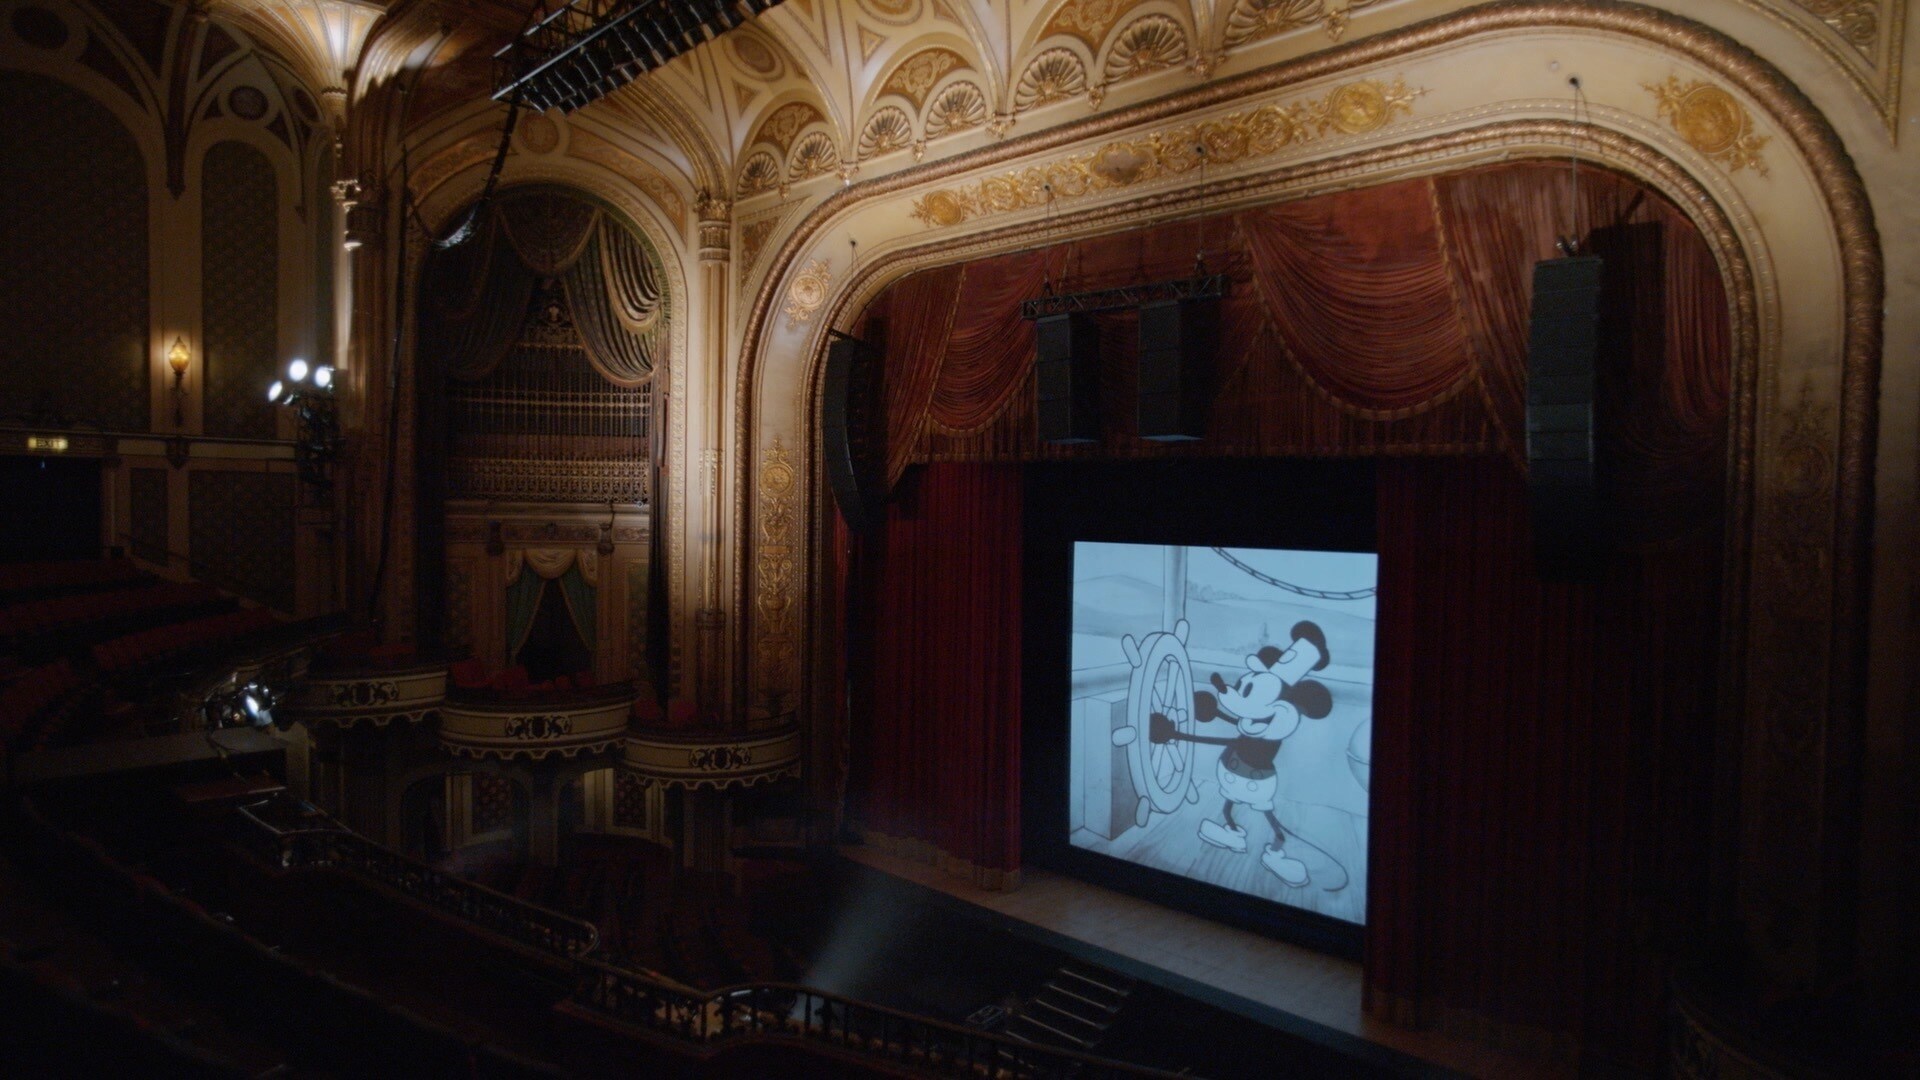 Steamboat Willie plays on the big screen. (Credit: Mortimer Productions)